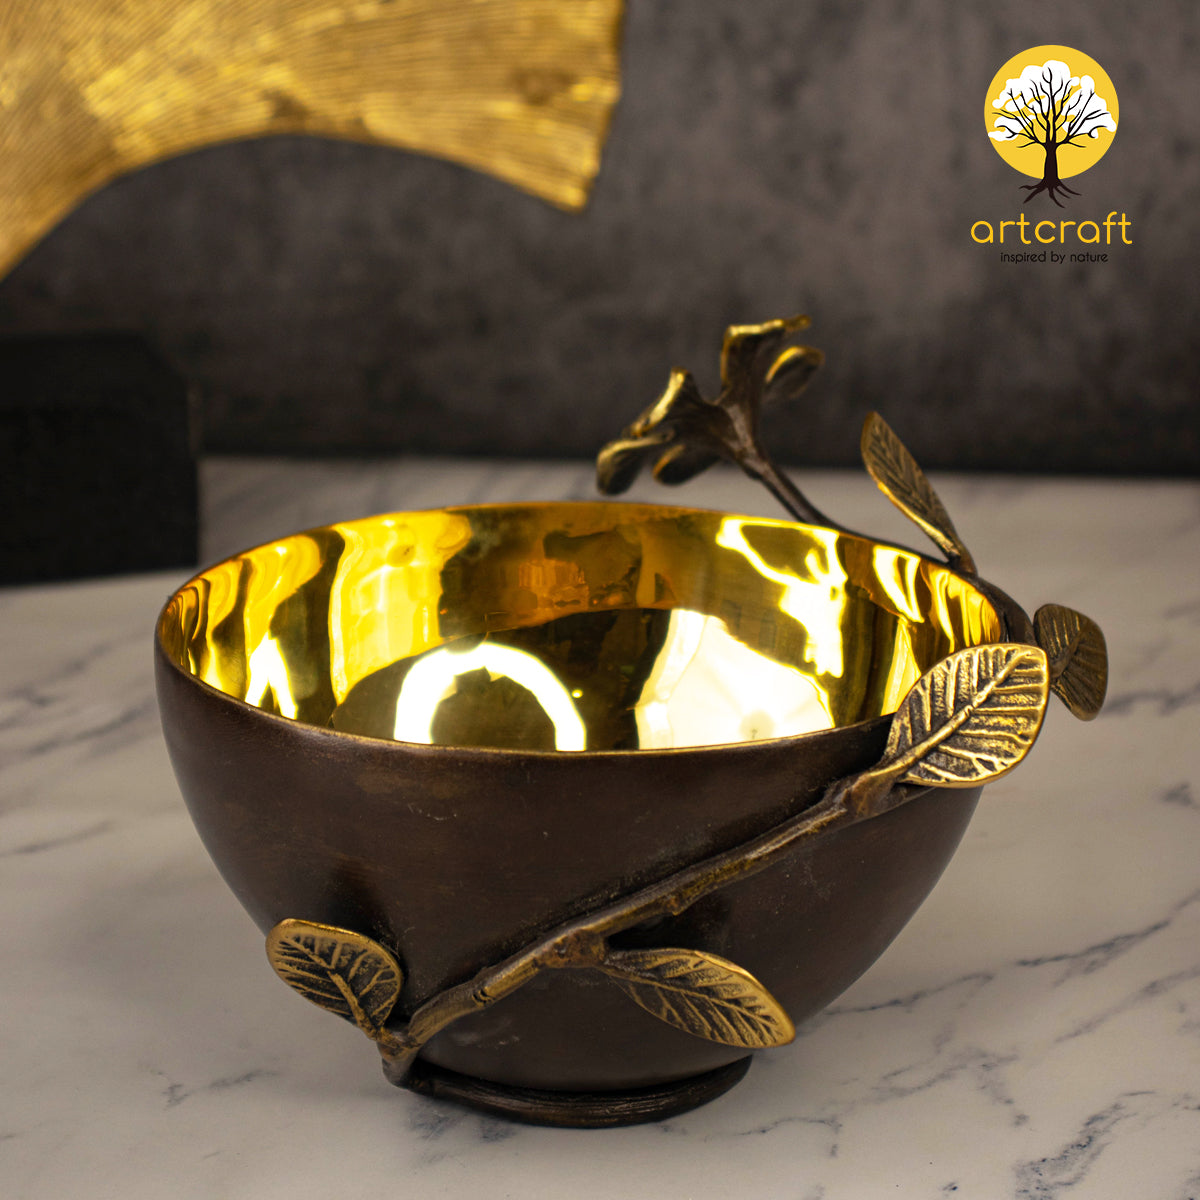 Bowl with leaves - 100% MADE FROM BRASS